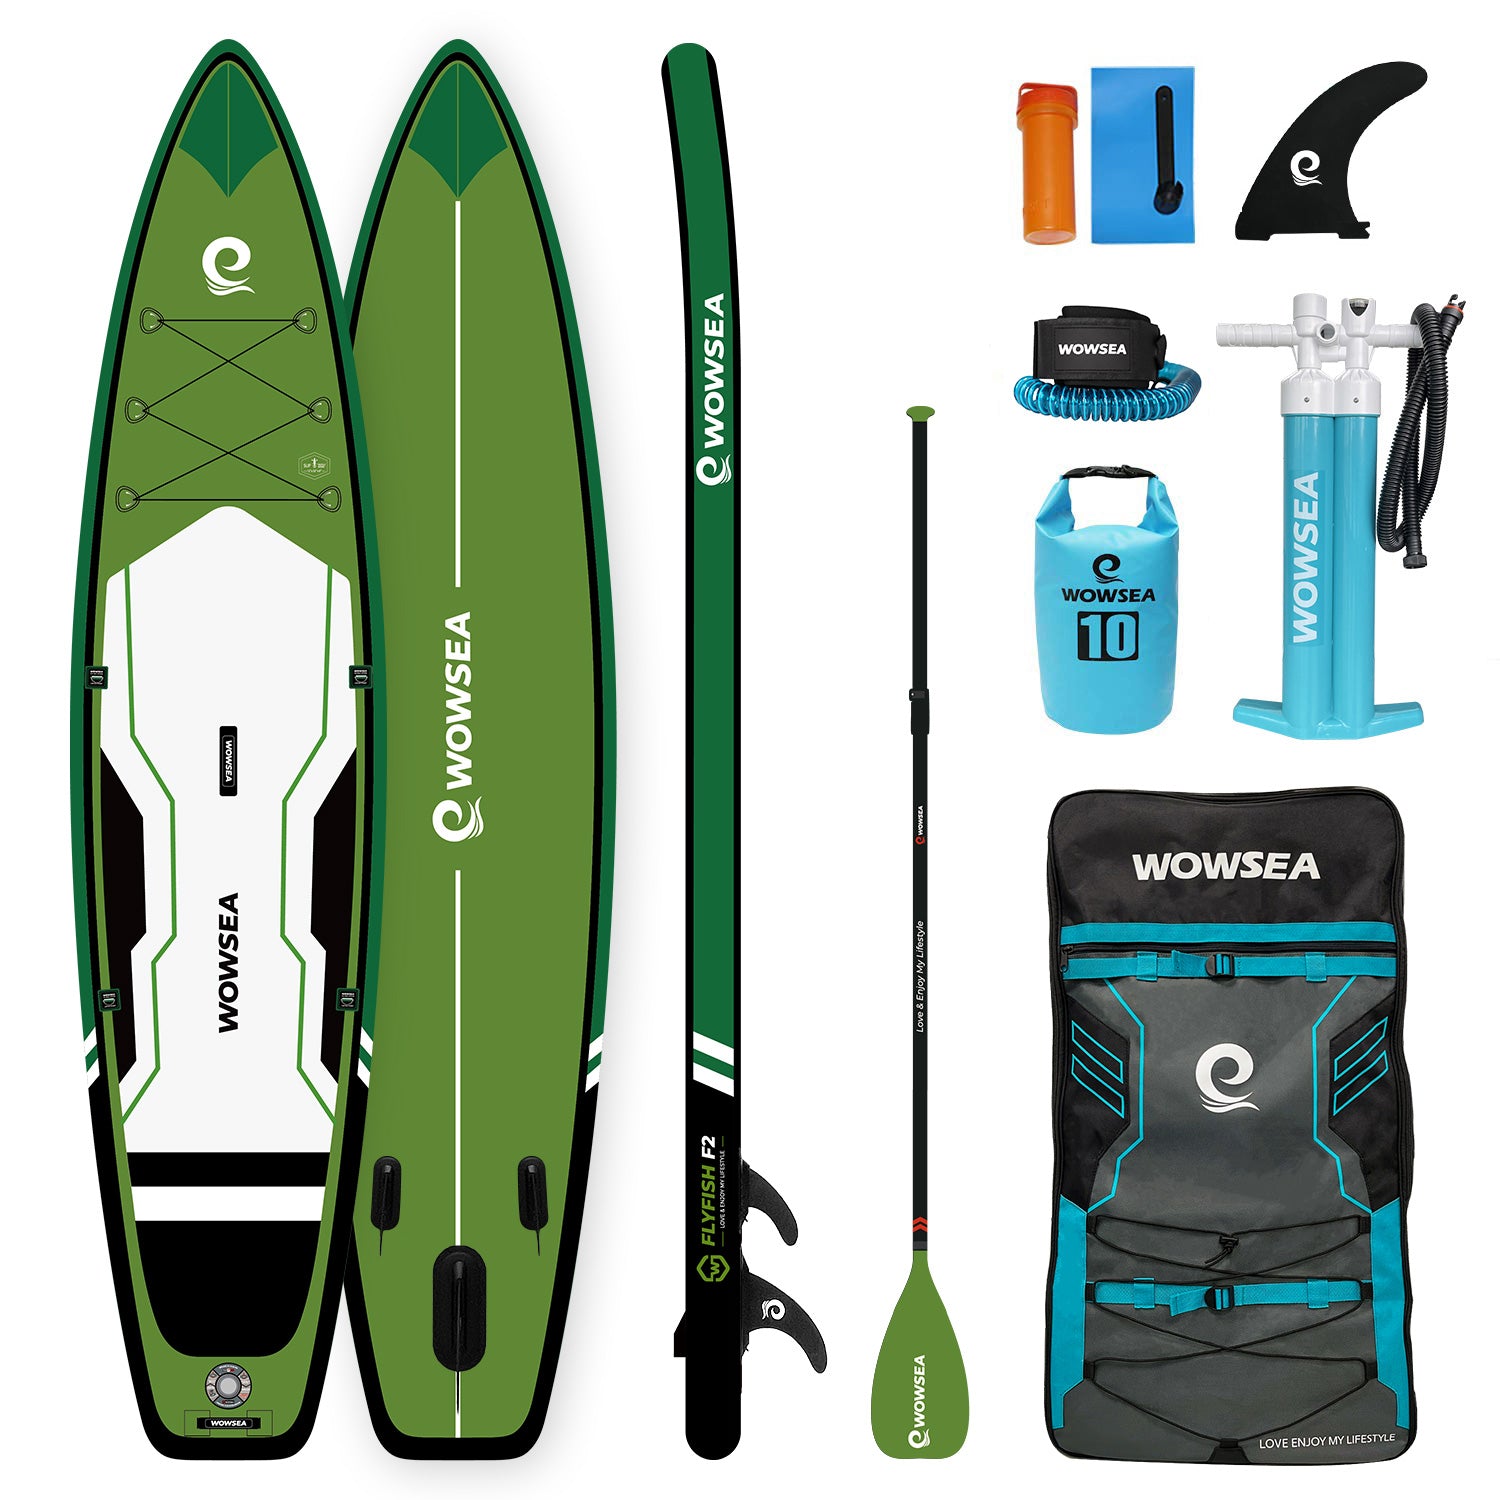 Flyfish F2 12\'/366cm SUP Paddle Package - Board WOWSEASUP